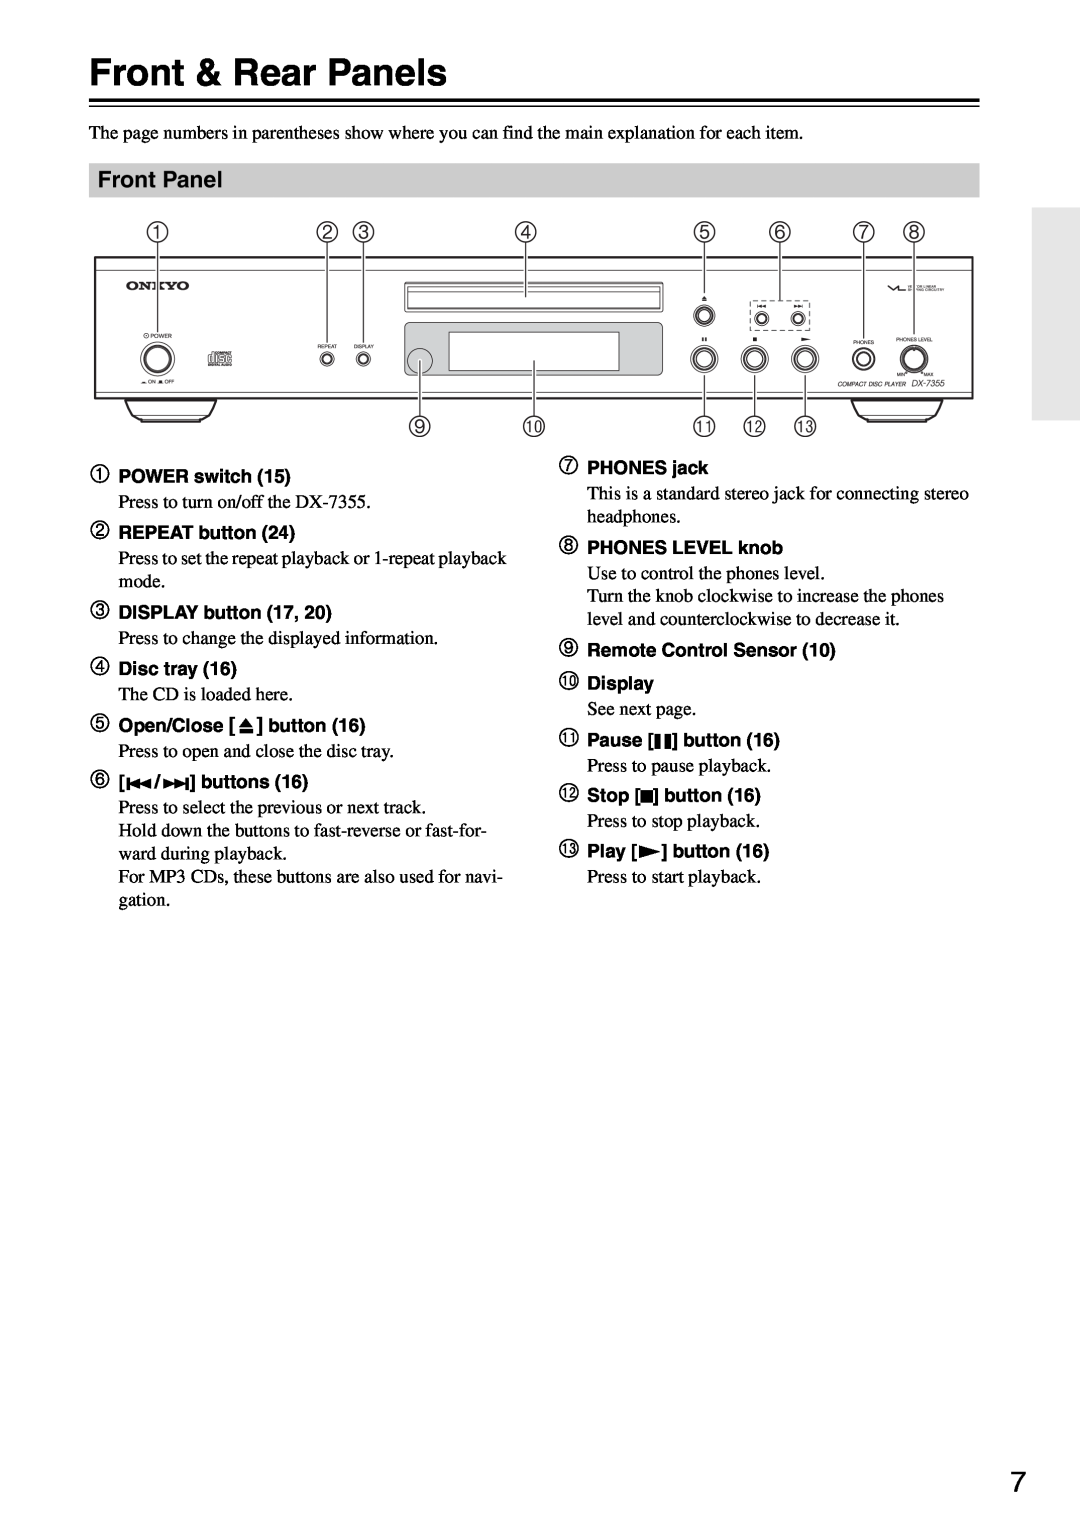 Onkyo DX-7355 instruction manual Front & Rear Panels, Front Panel 